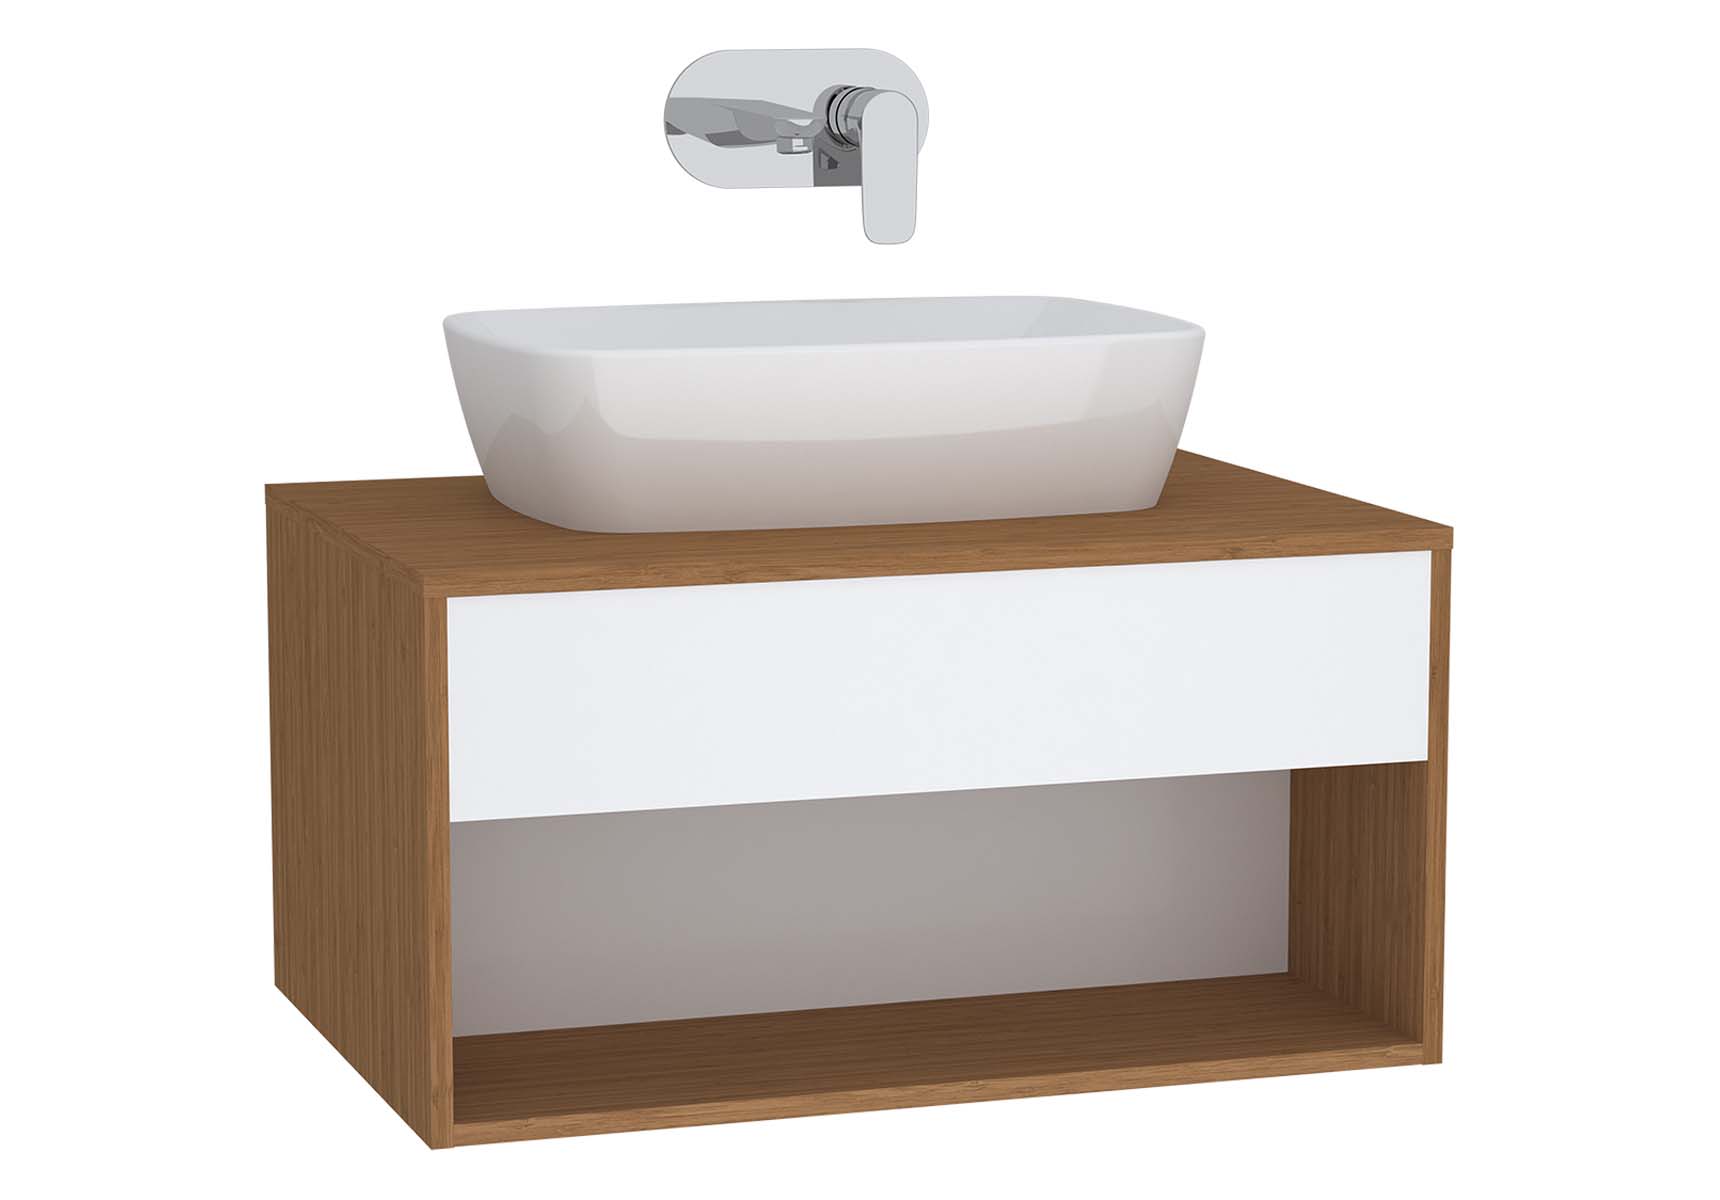 Integra Hotel Unit, 80 cm, for countertop basins, with 53 cm depth, White High Gloss & Bamboo